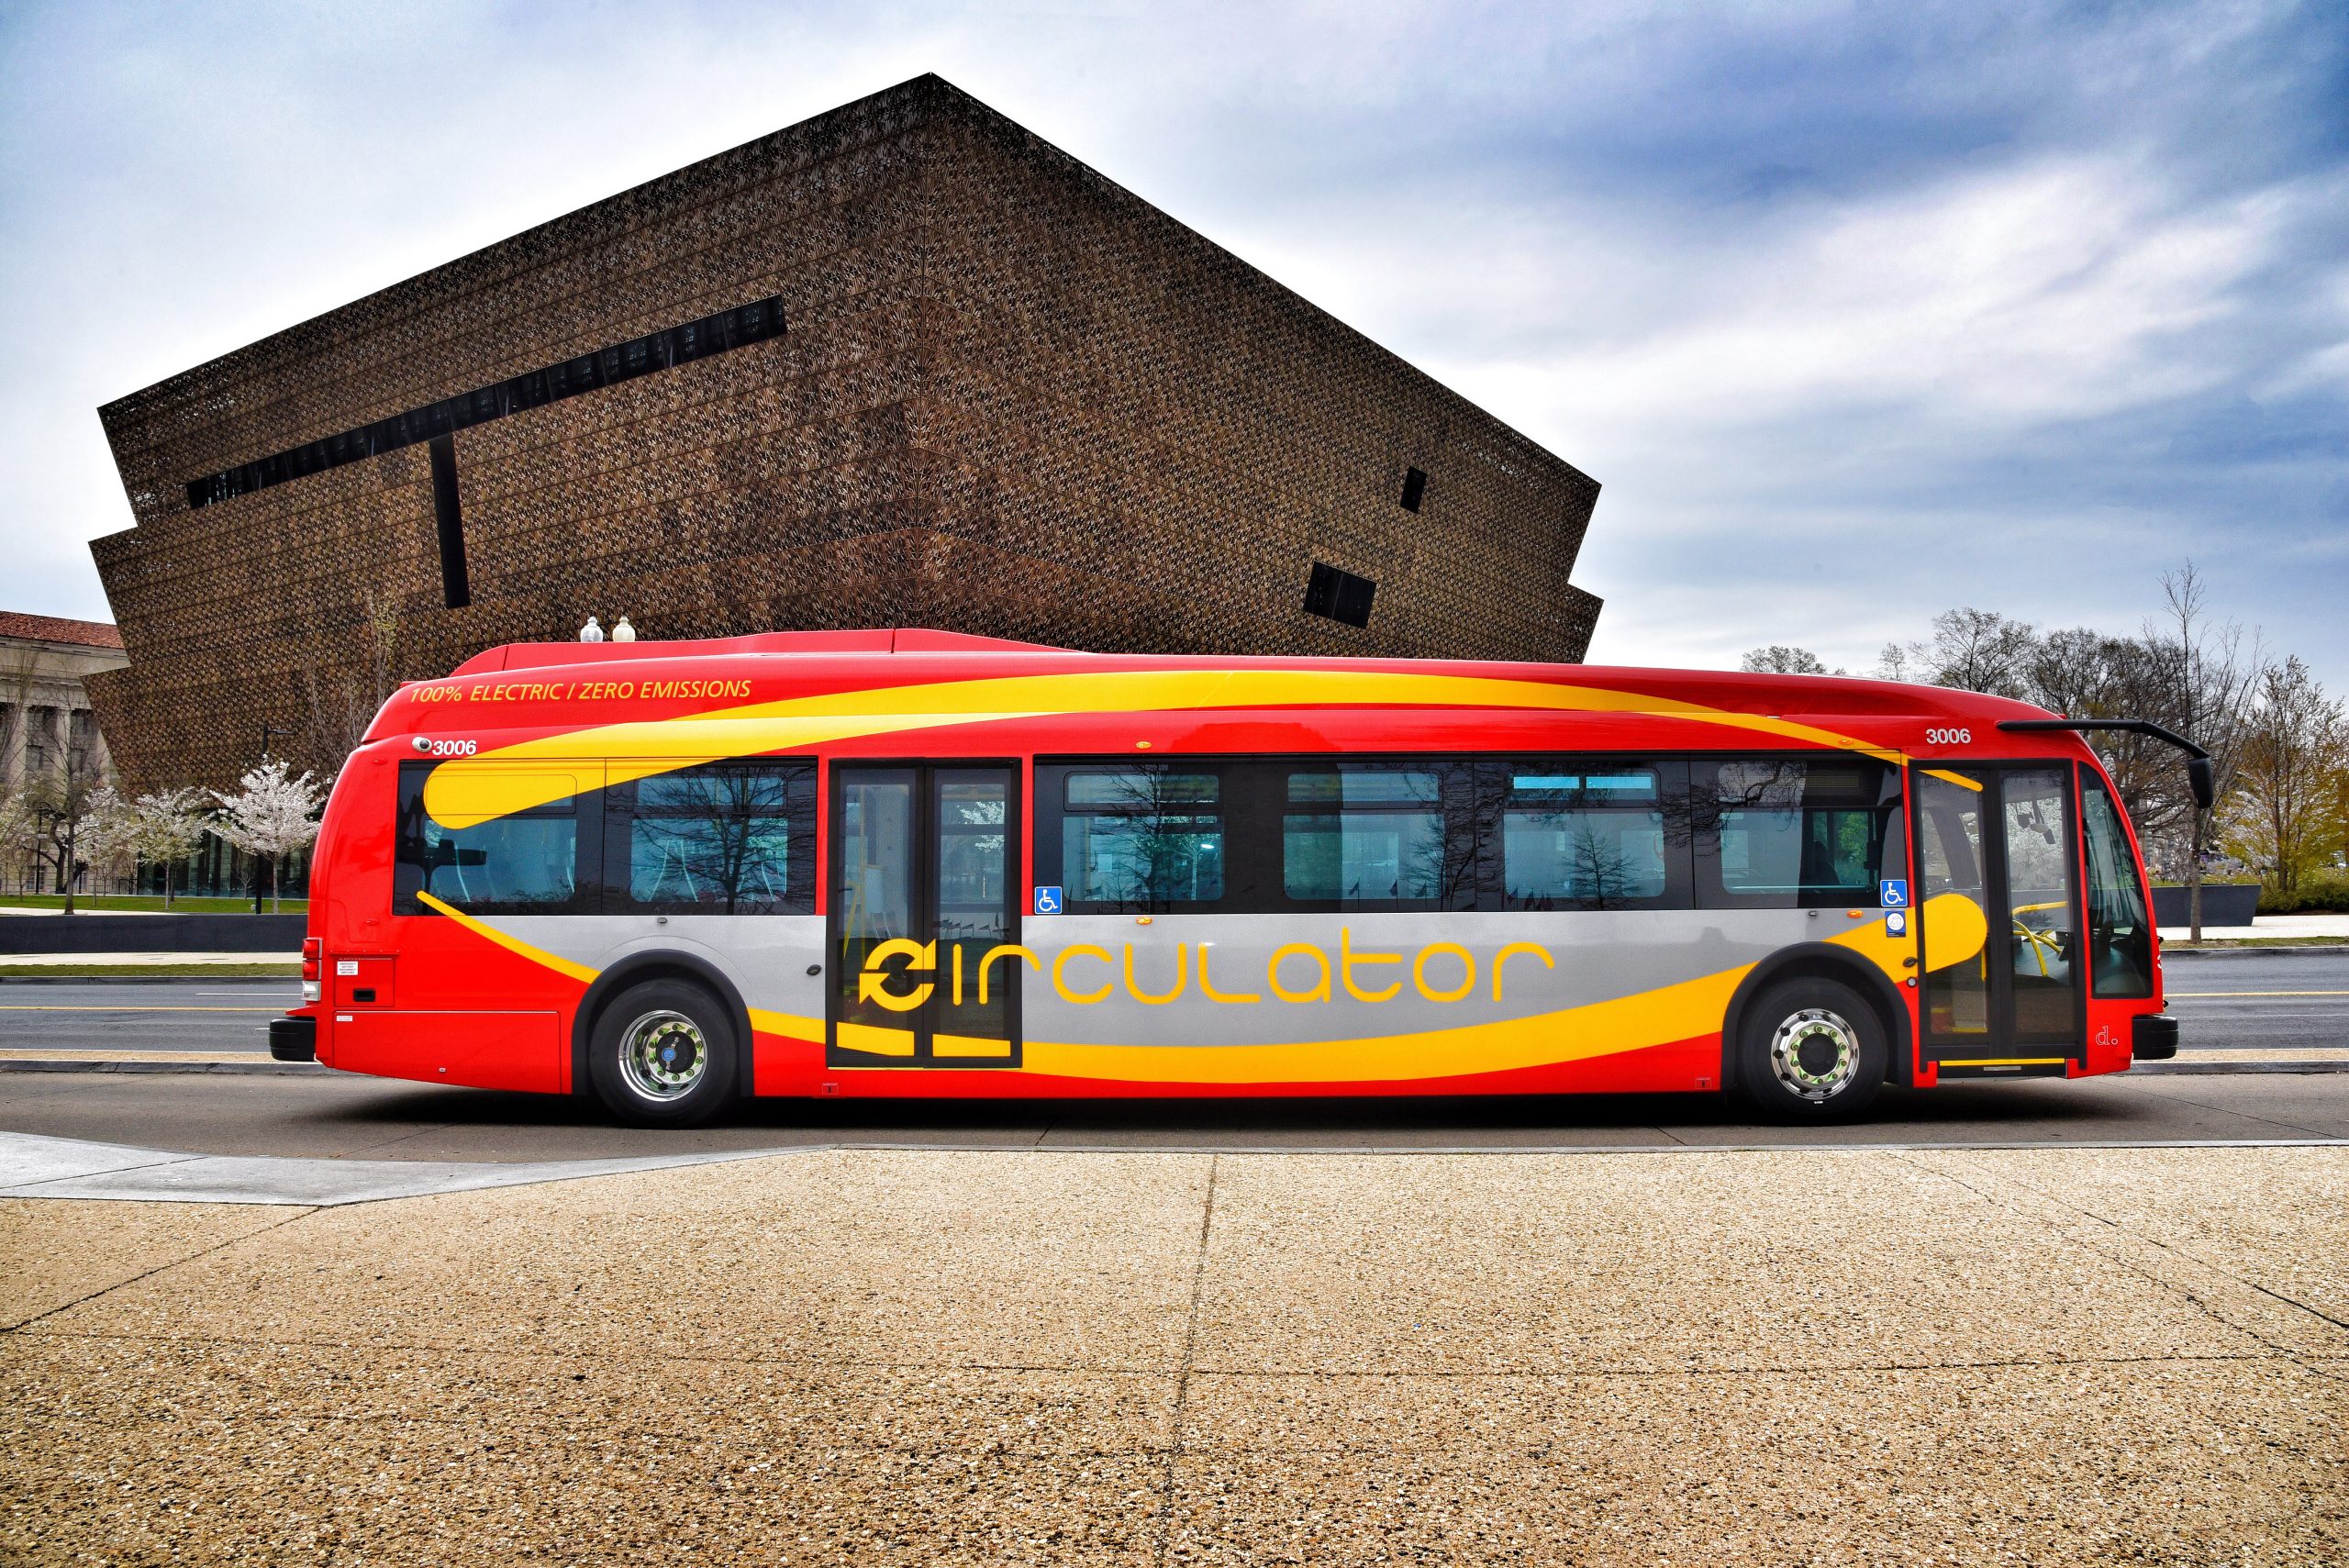 STRONGER HEREFORD #2 | ‘City Zipper’ project to deliver electric buses and improve service for passengers in Hereford city